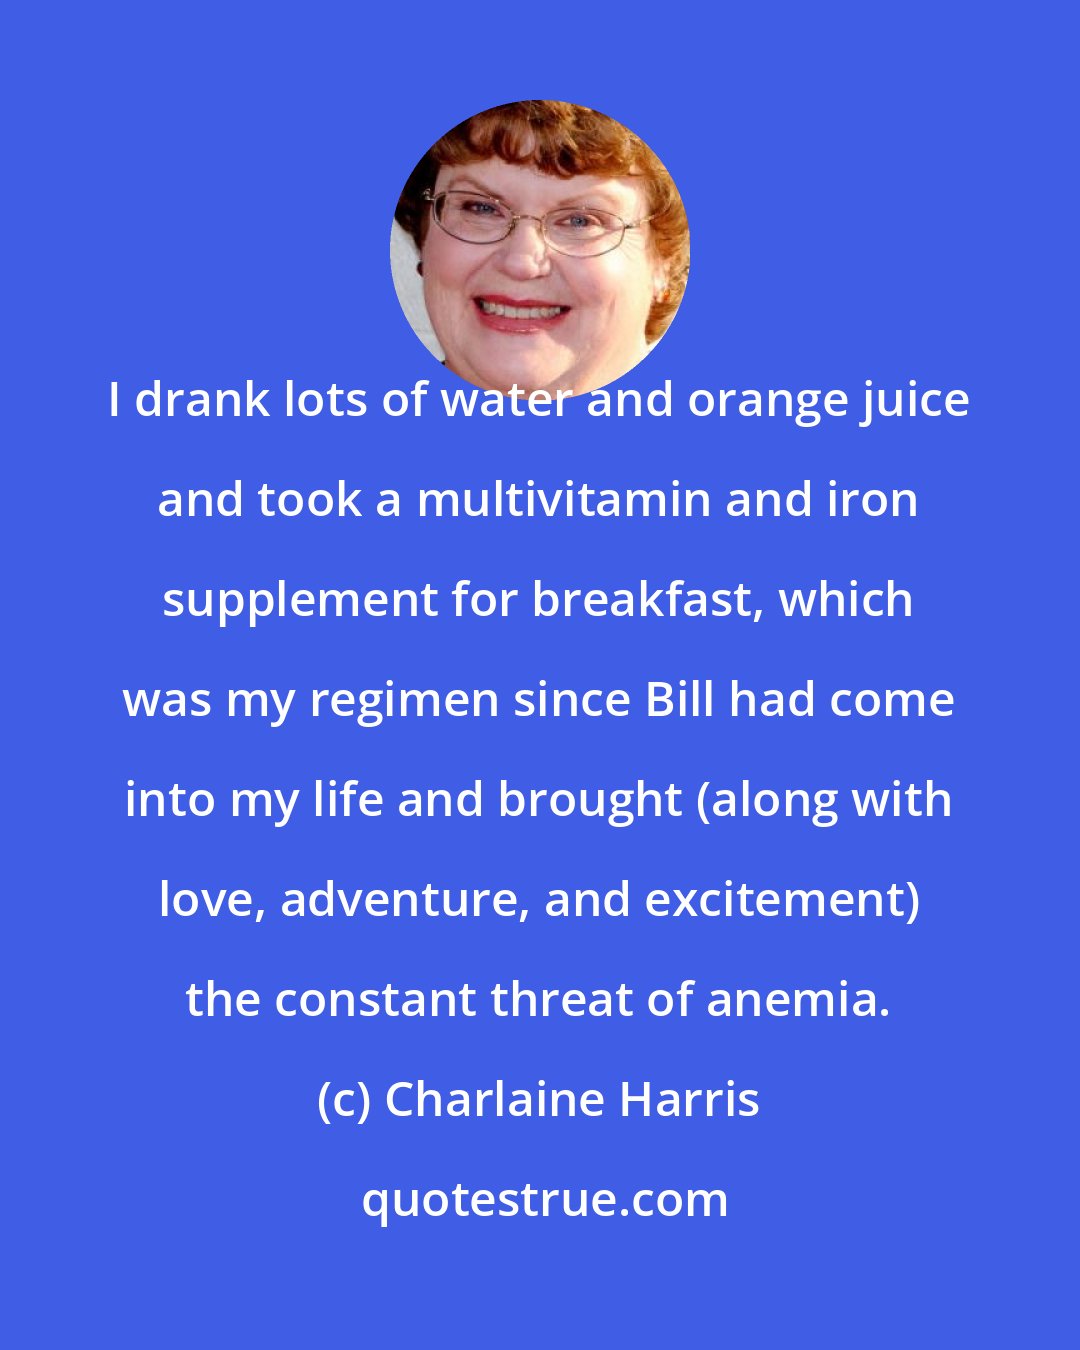 Charlaine Harris: I drank lots of water and orange juice and took a multivitamin and iron supplement for breakfast, which was my regimen since Bill had come into my life and brought (along with love, adventure, and excitement) the constant threat of anemia.